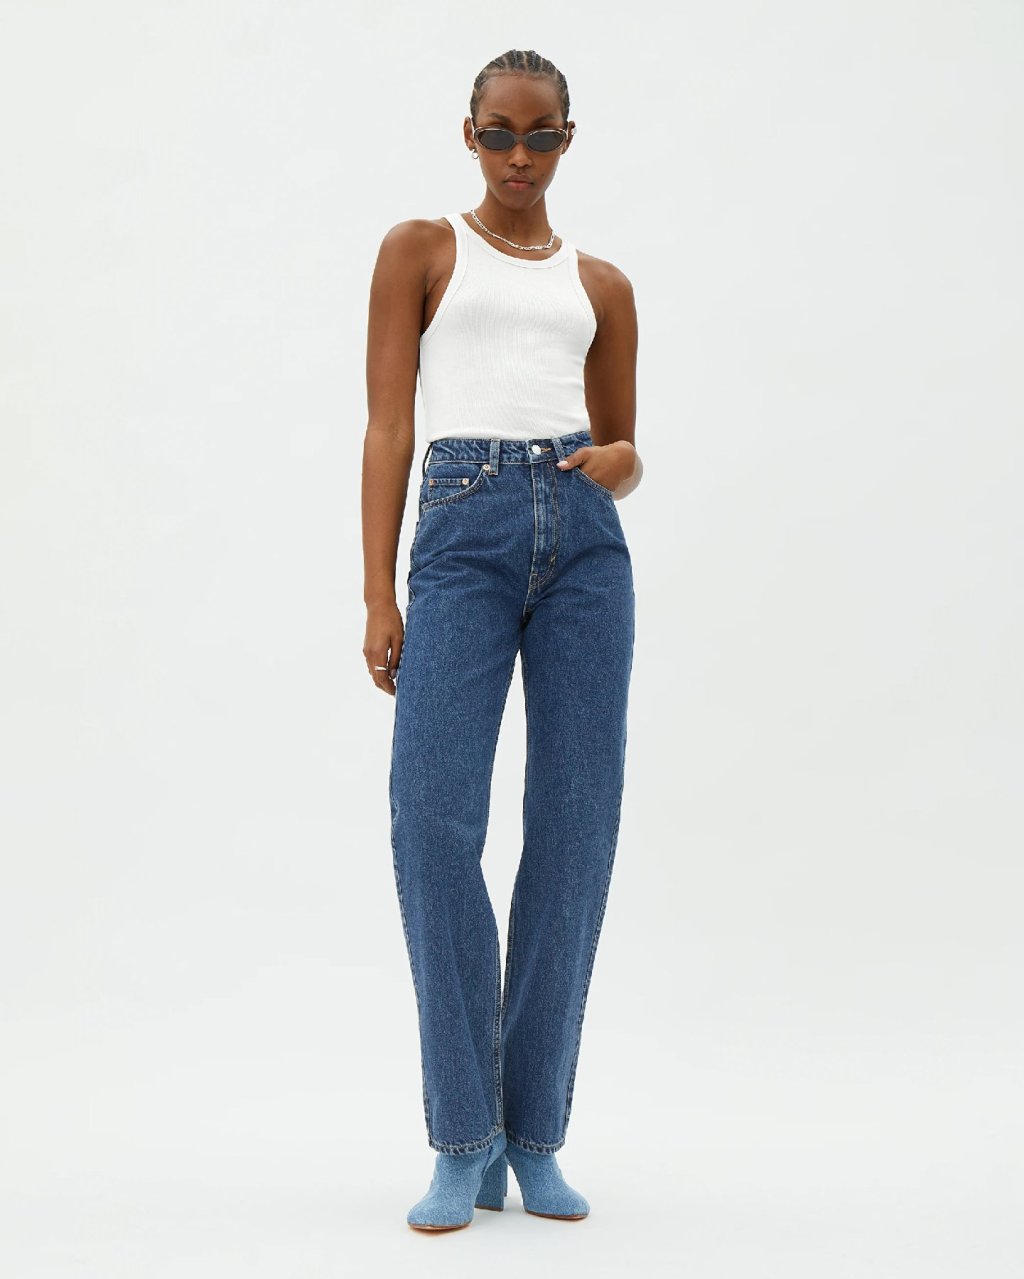 ZARA JEANS TRY ON HAUL  I found the perfect pair of jeans